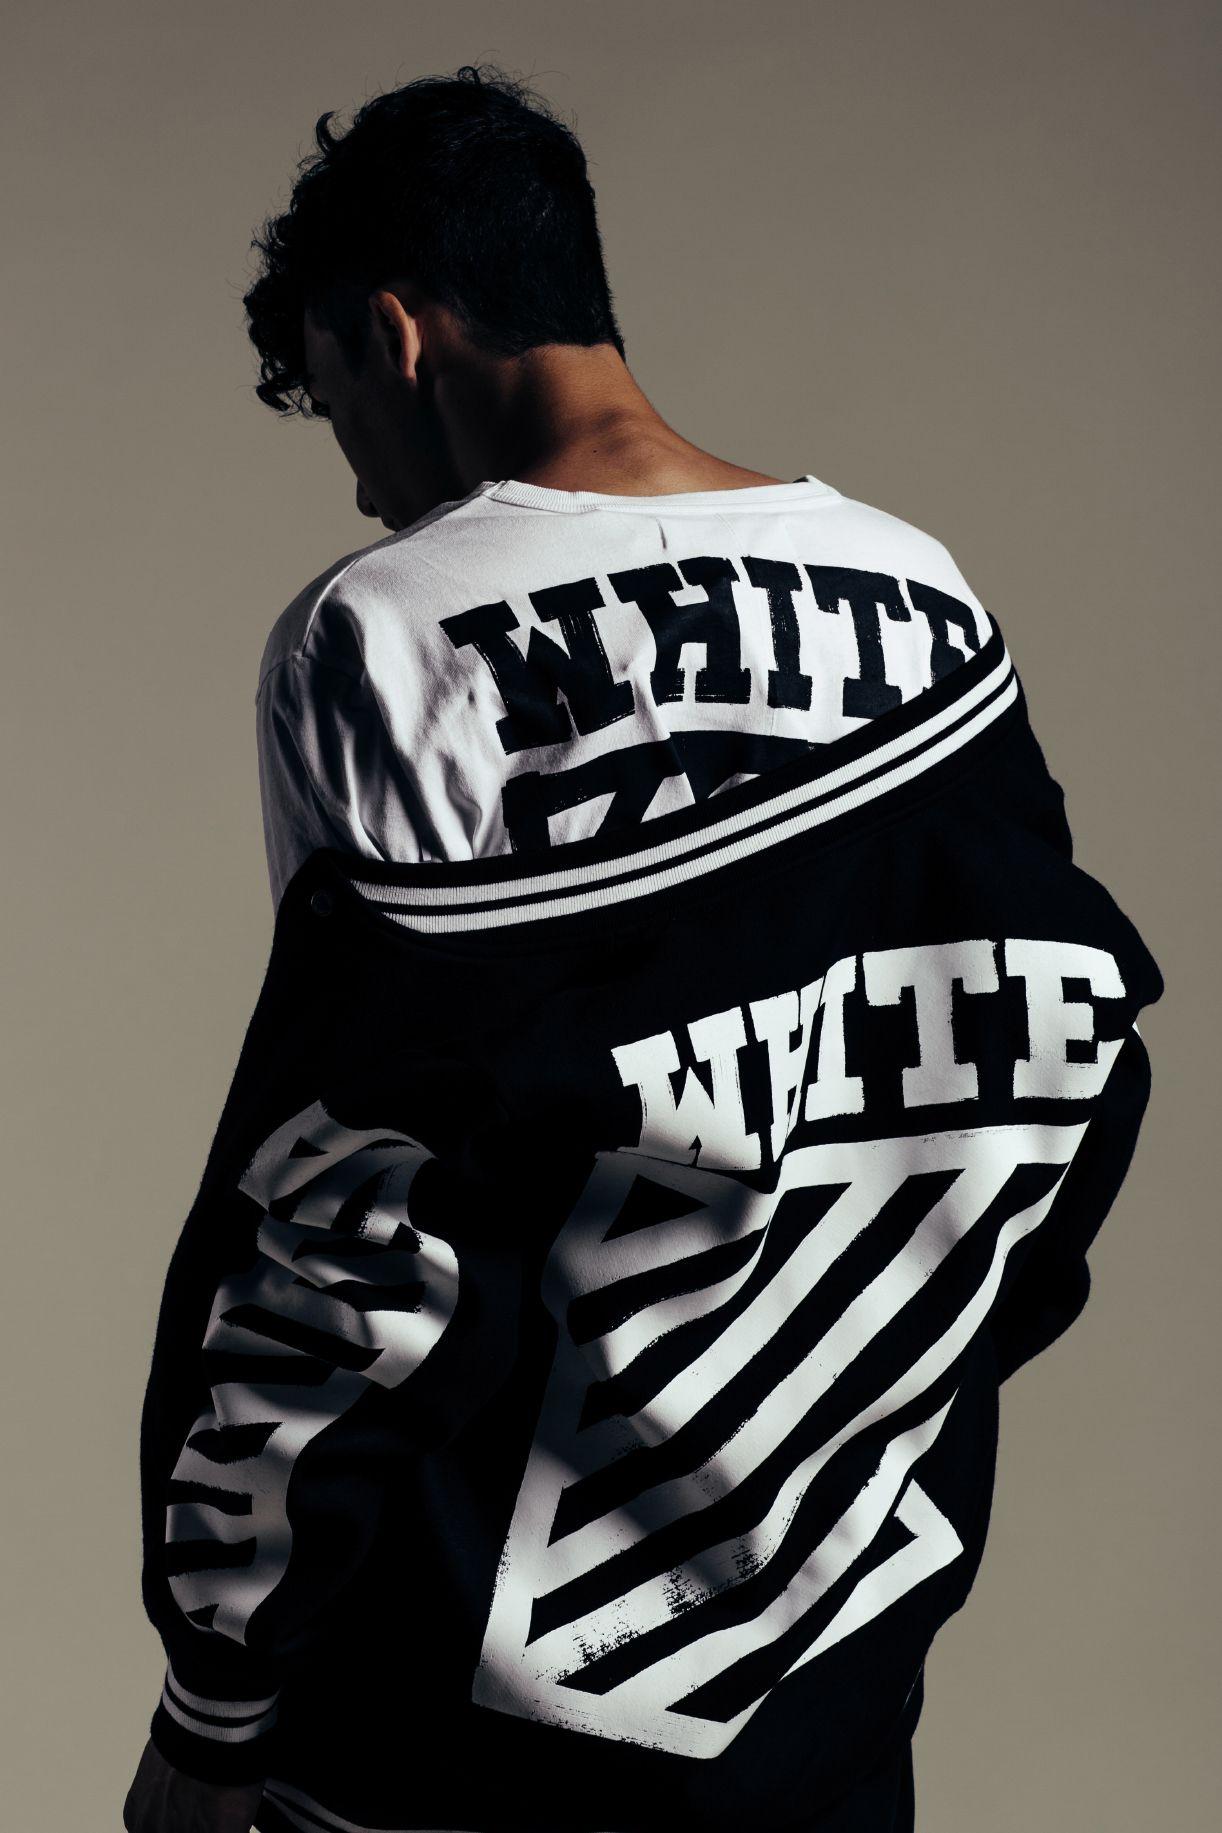 Off White Clothing Logo - Off White Supreme Hype Beast Apparel #Supreme #Off White #HypeBeast